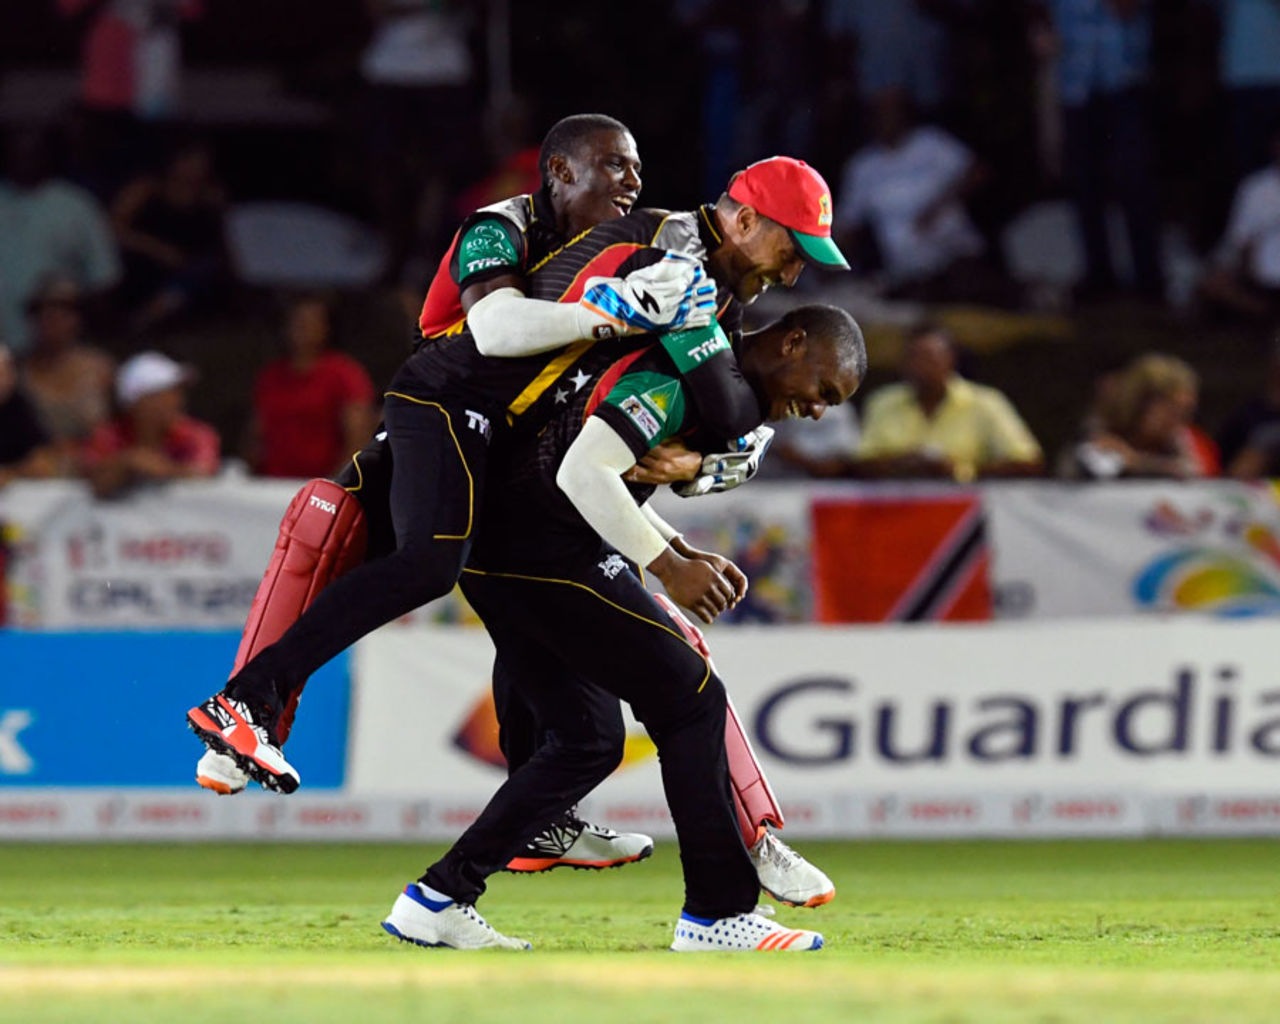 Evin Lewis is mobbed by his team-mates after running out Hashim Amla, St Kitts & Nevis Patriots v Trinbago Knight Riders, CPL 2016, Lauderhill, July 29, 2016